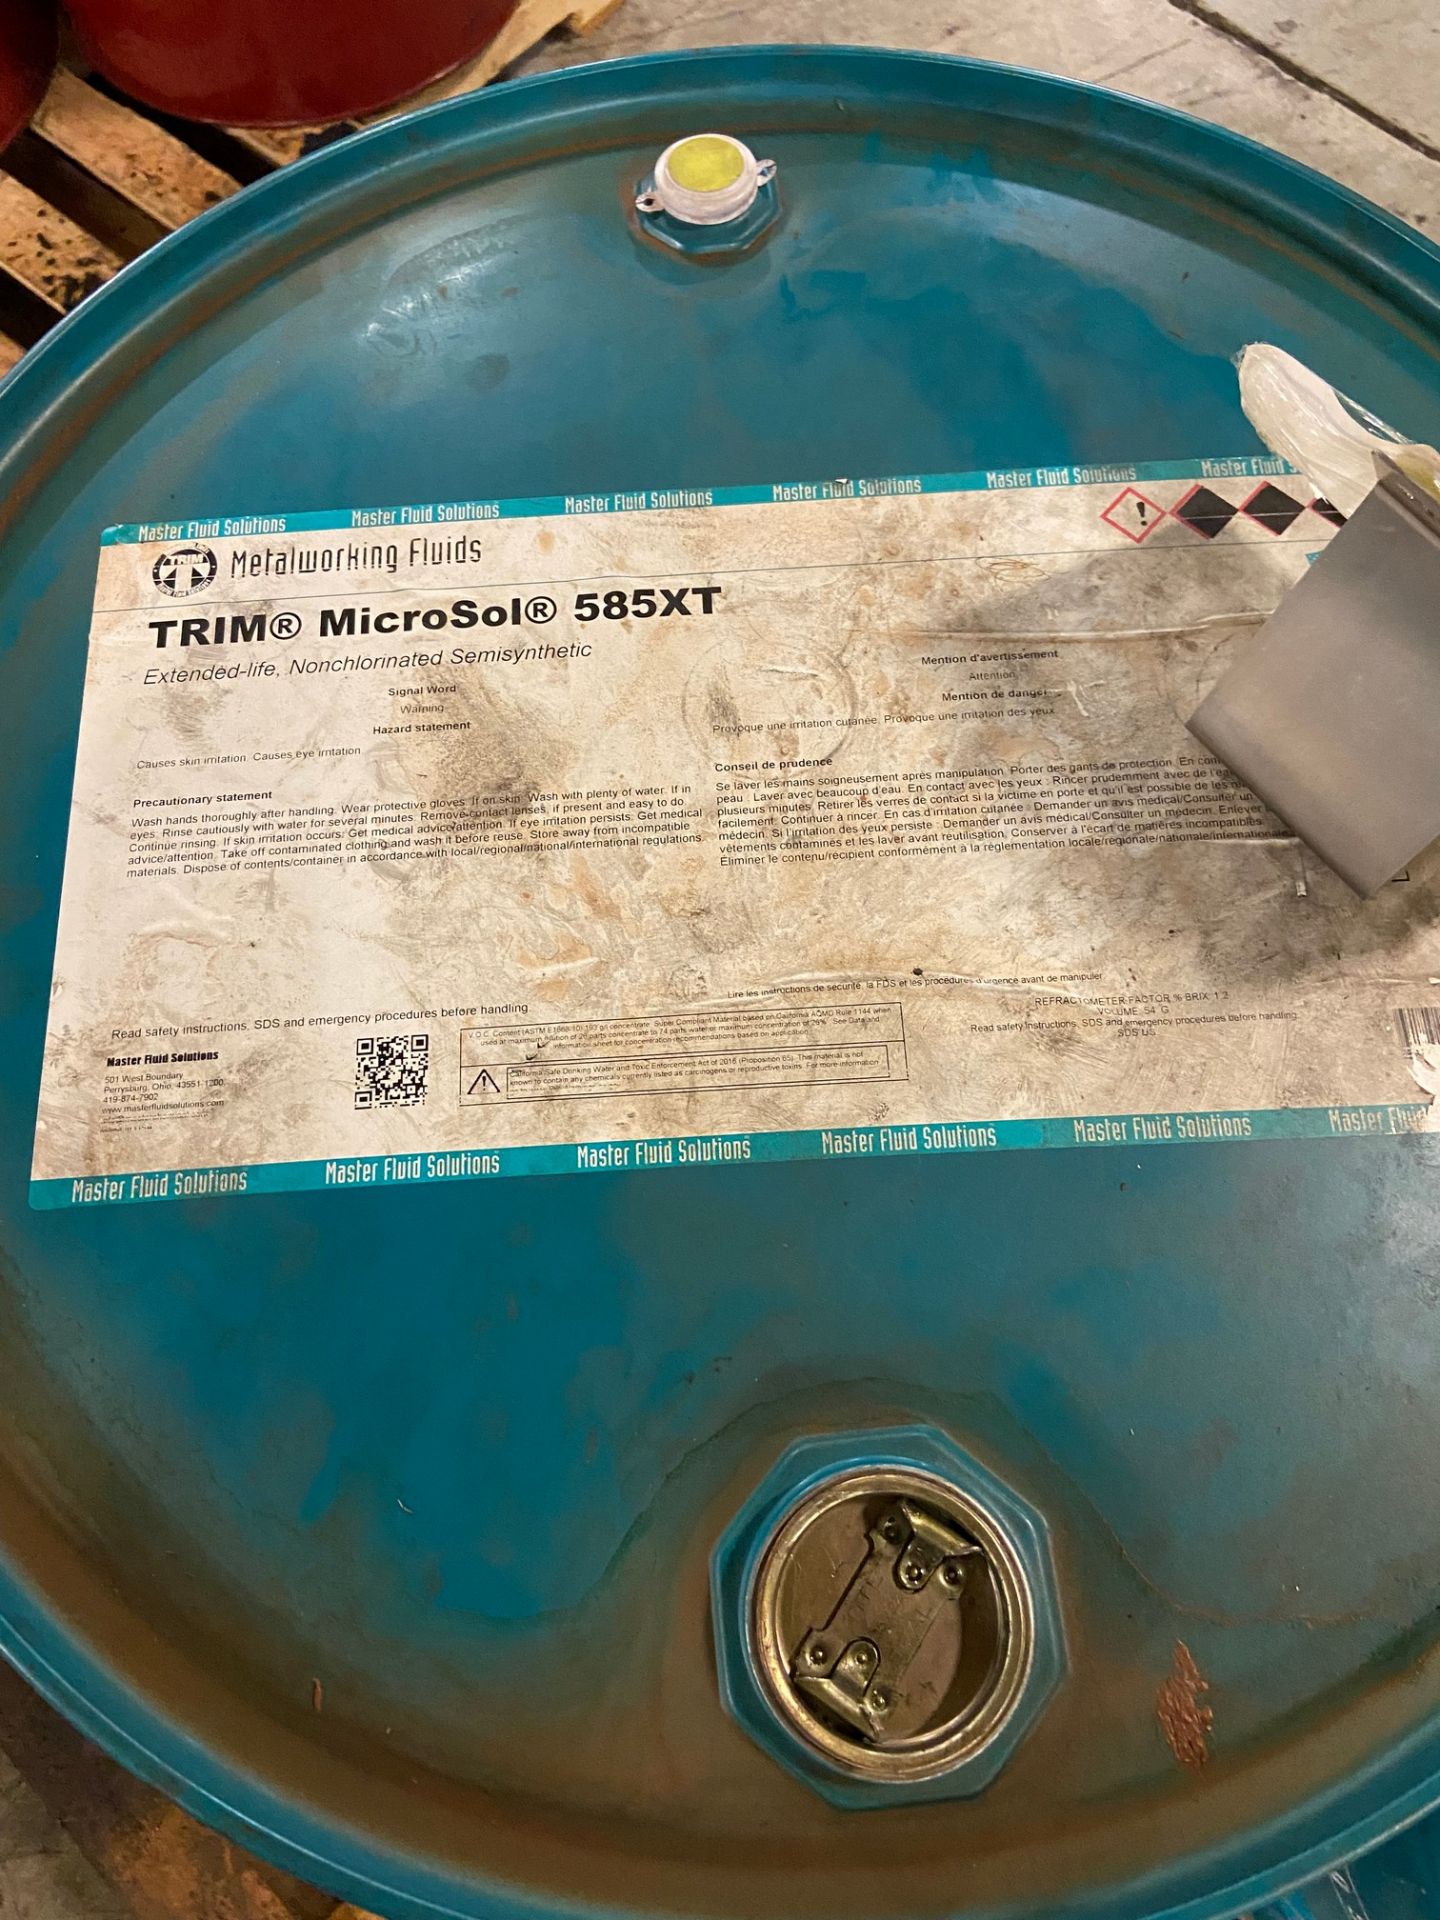 LOT (2) 45 GALLON DRUM OF TRIM MICROSOL 585XT OPENED DRUMS - Image 2 of 3